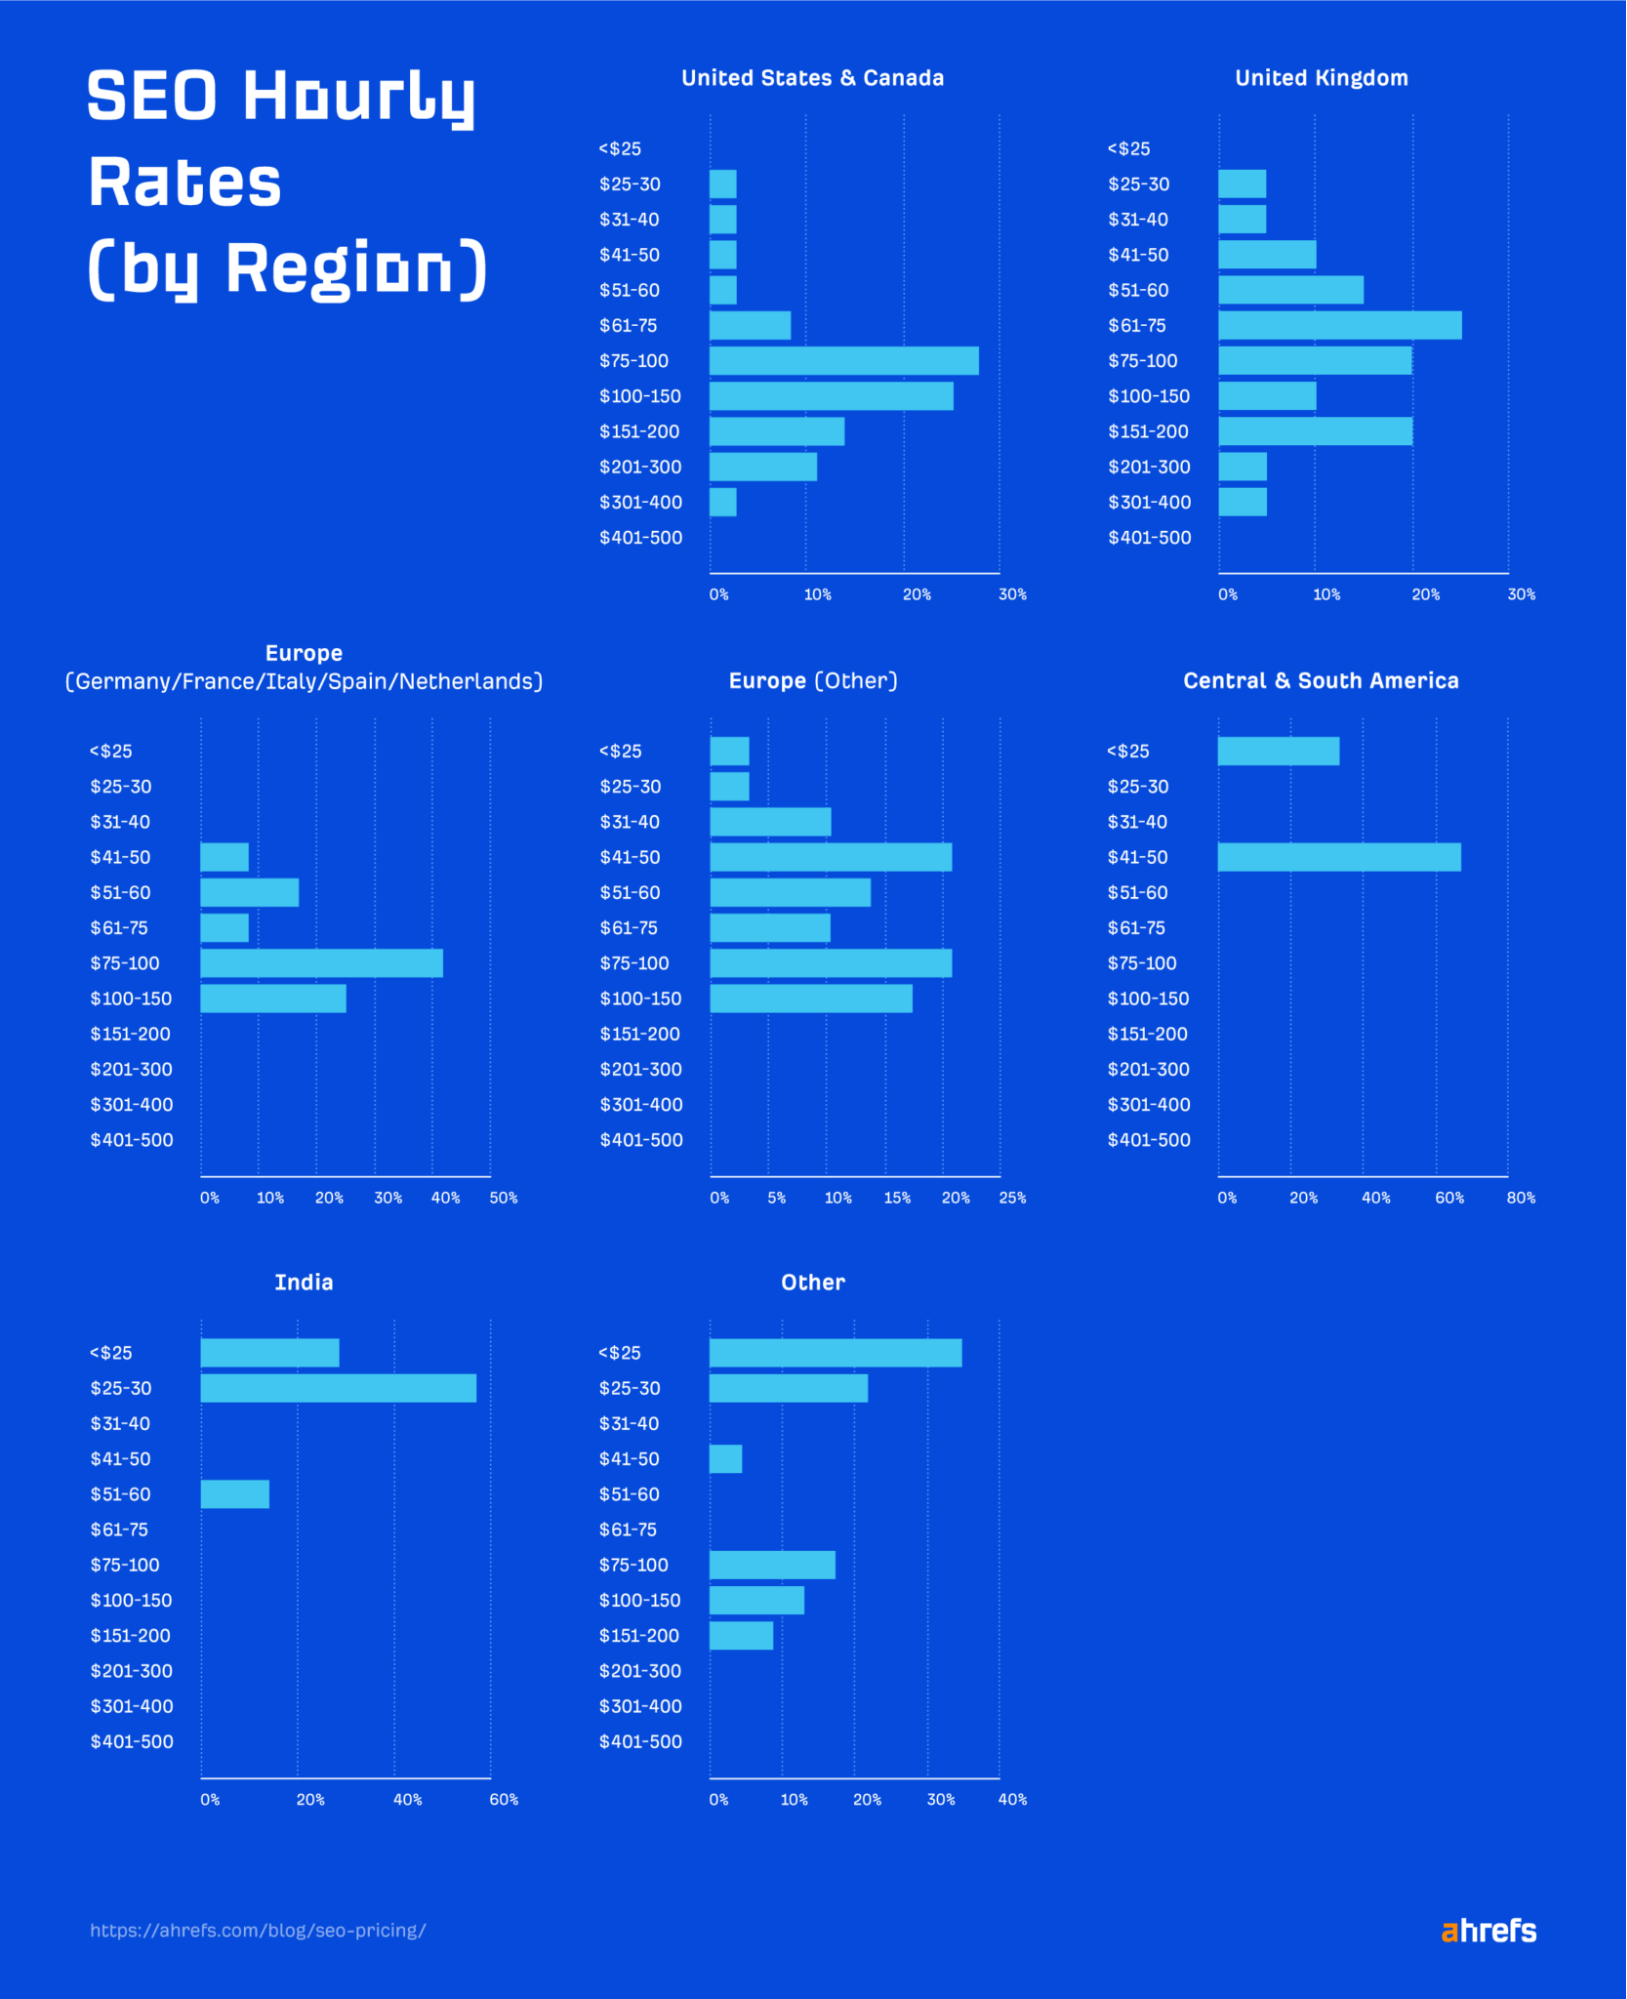 Bar graphs showing SEO hourly rates by region